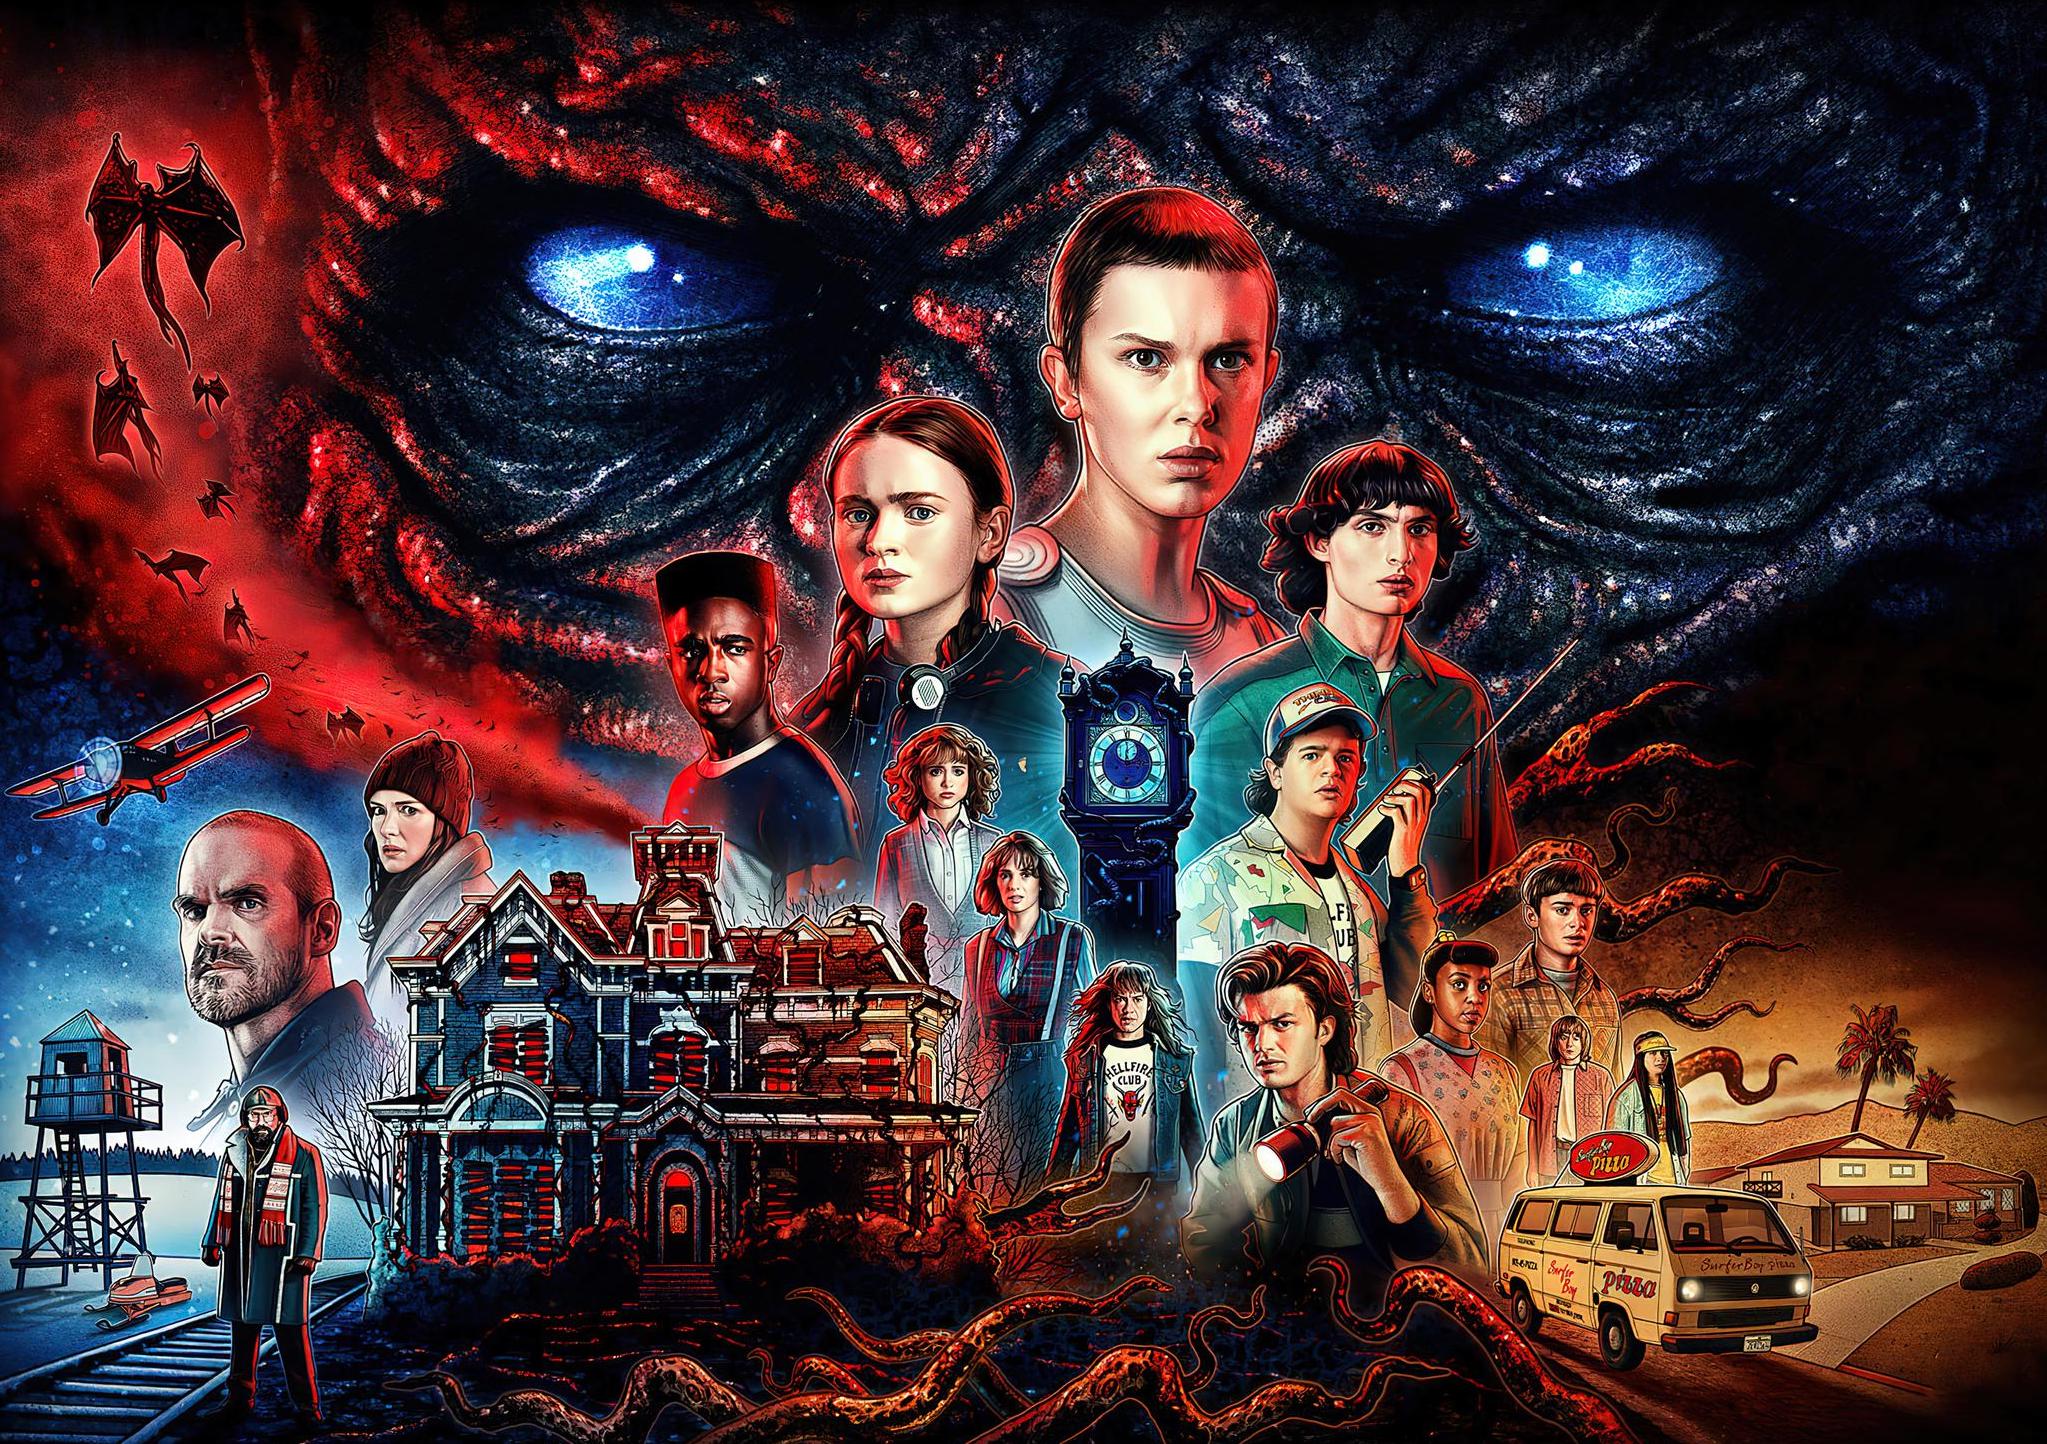 Here's all the dope on the creative artists behind 'Stranger Things